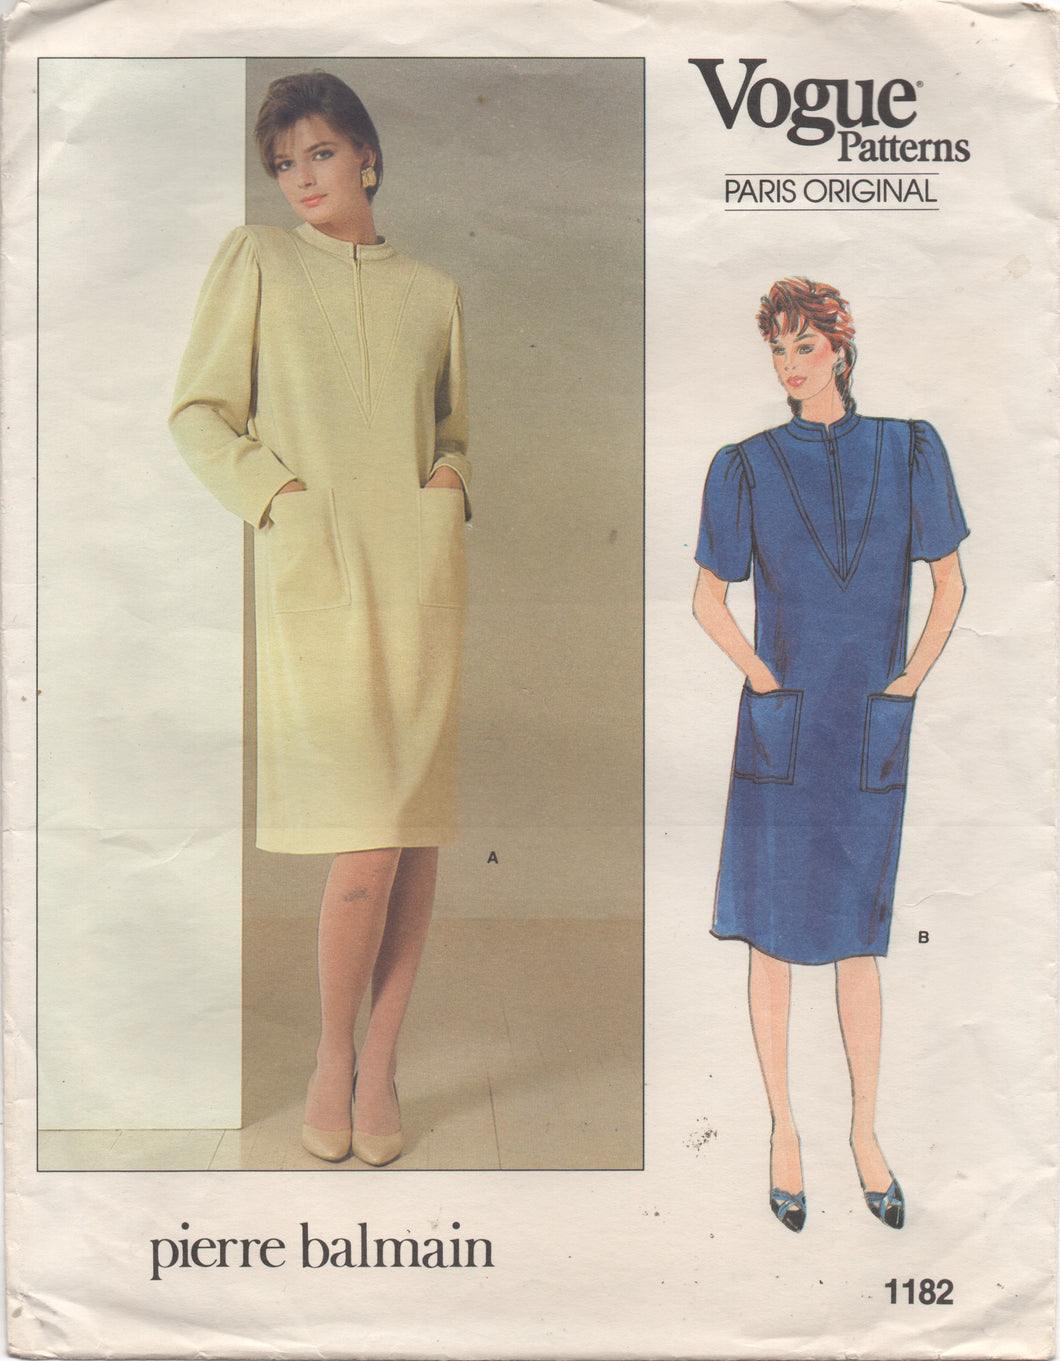 1980's Vogue Paris Original Midi Straight line Dress Pattern with Yoke accent and Short or Long Sleeves -Pierre Balmain - Bust 32.5